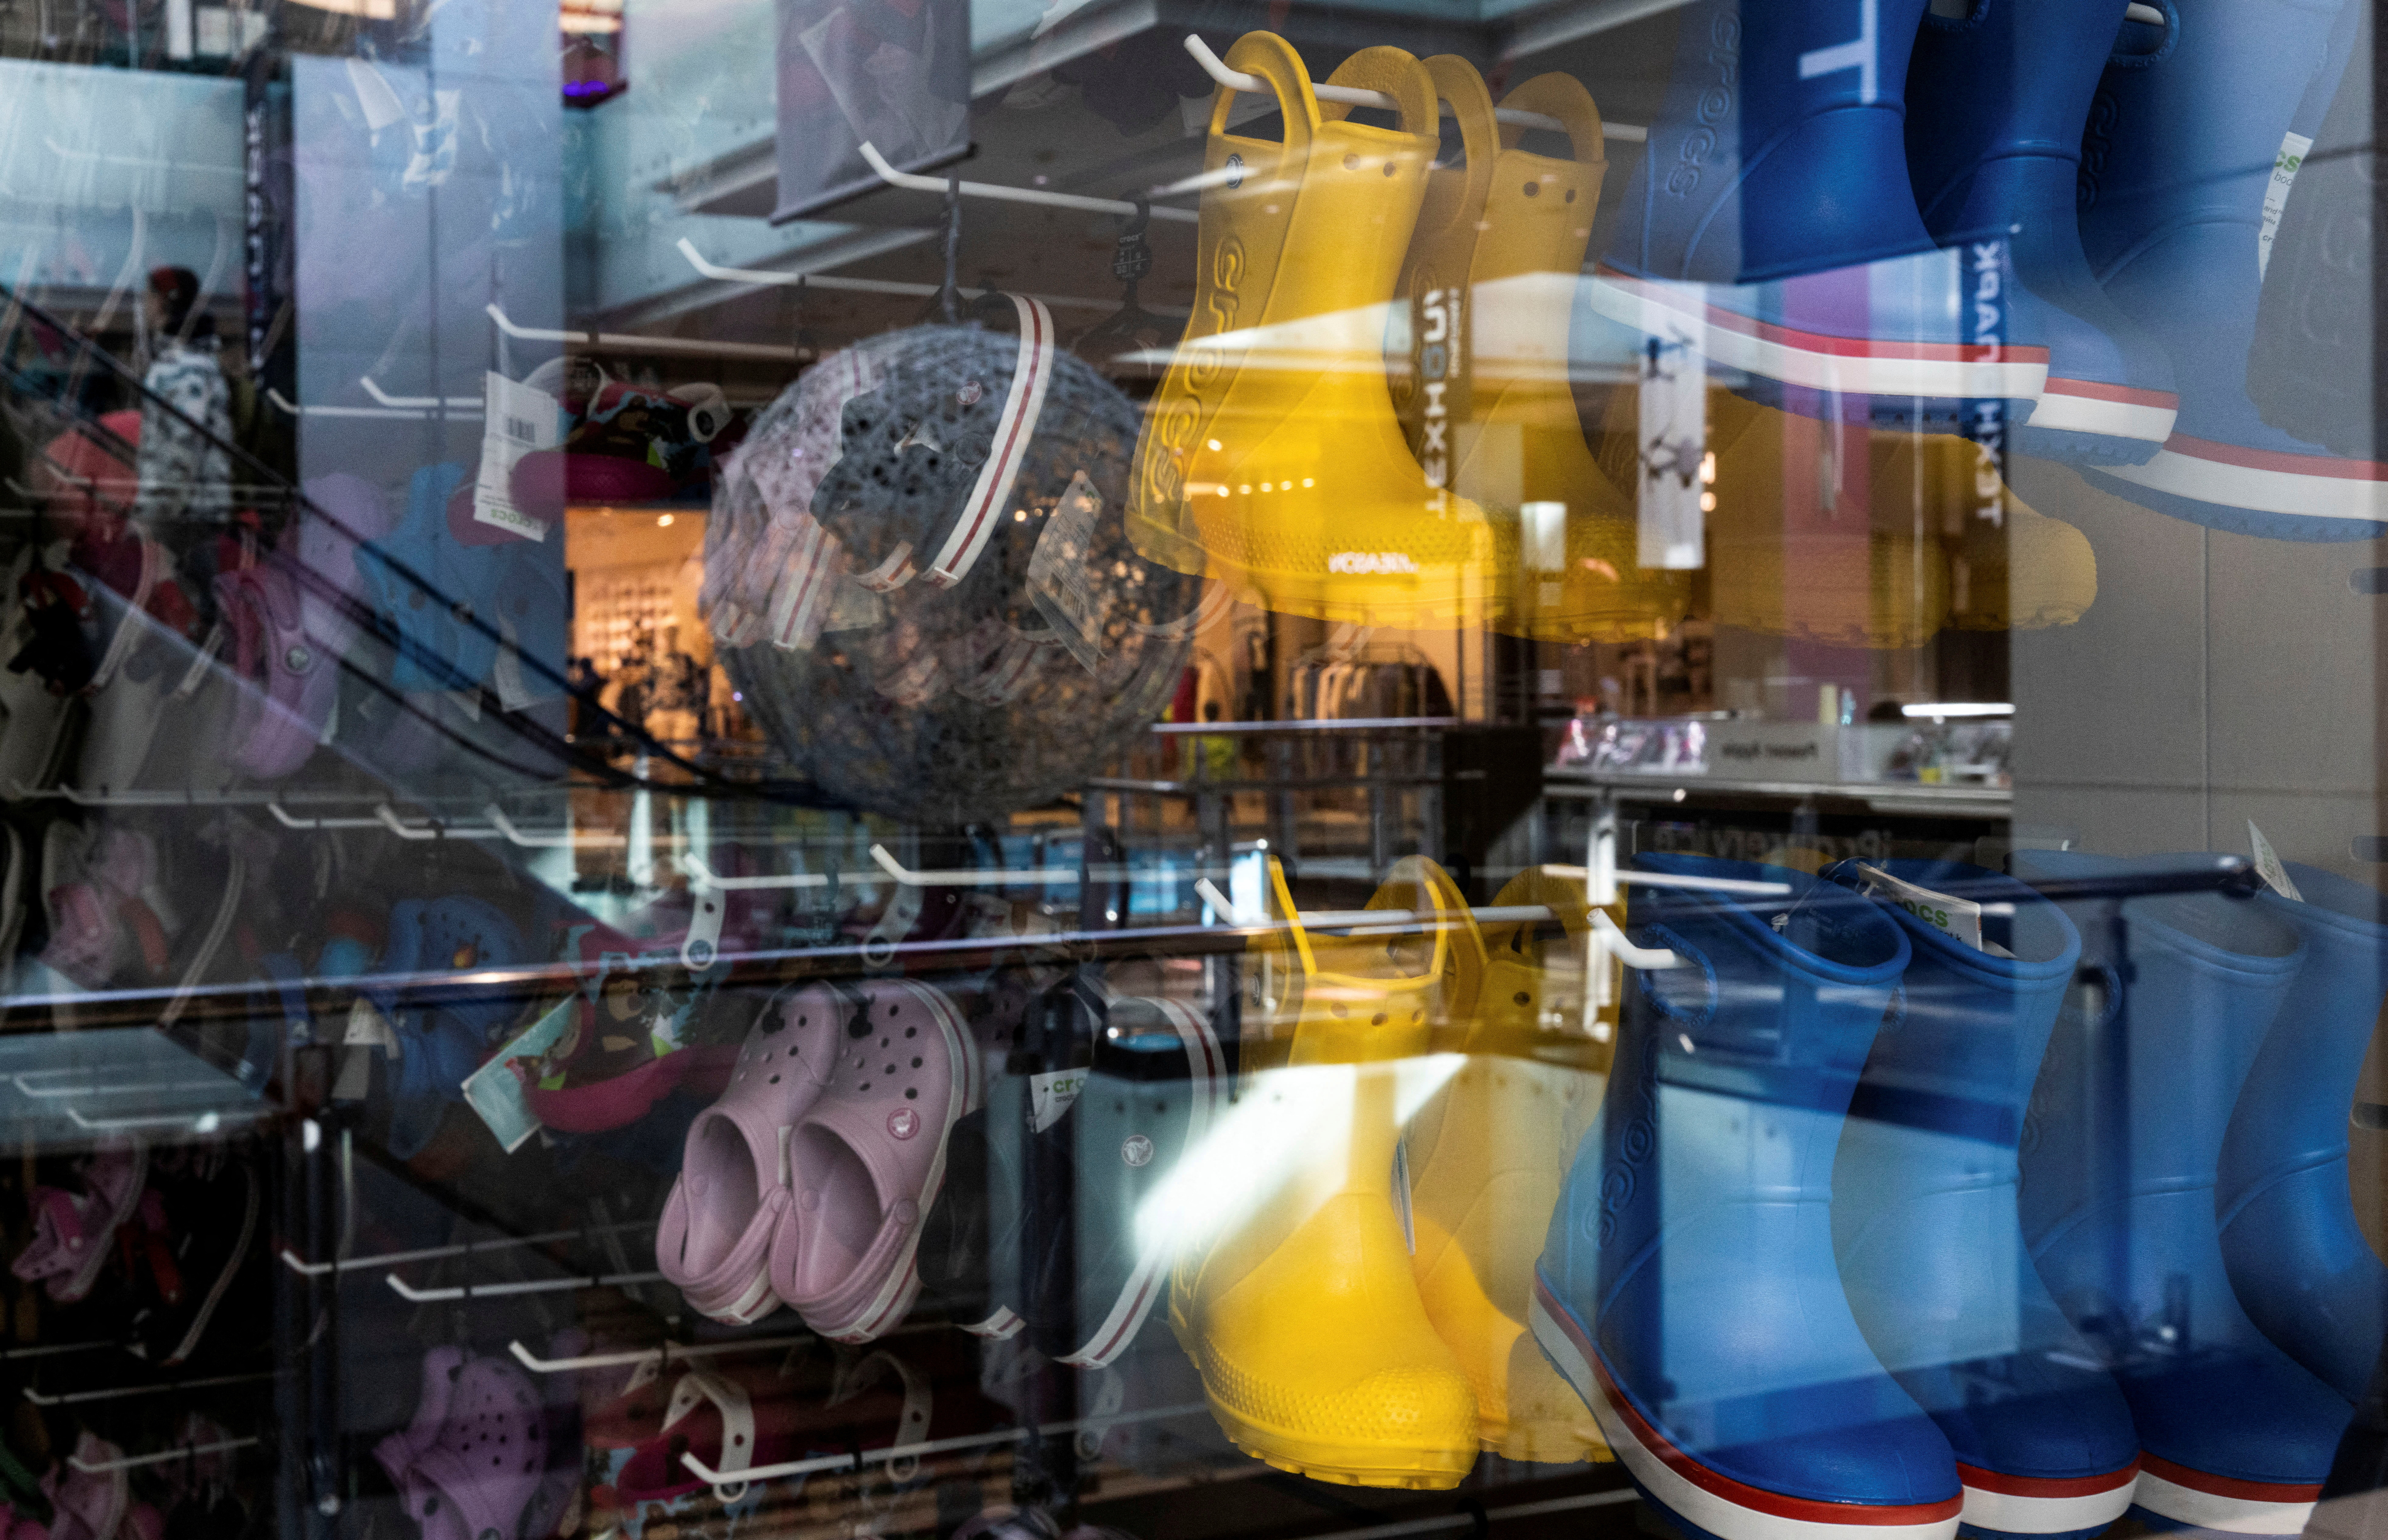 A view through a shop window shows Crocs shoes at a closed store in a shopping mall in Moscow